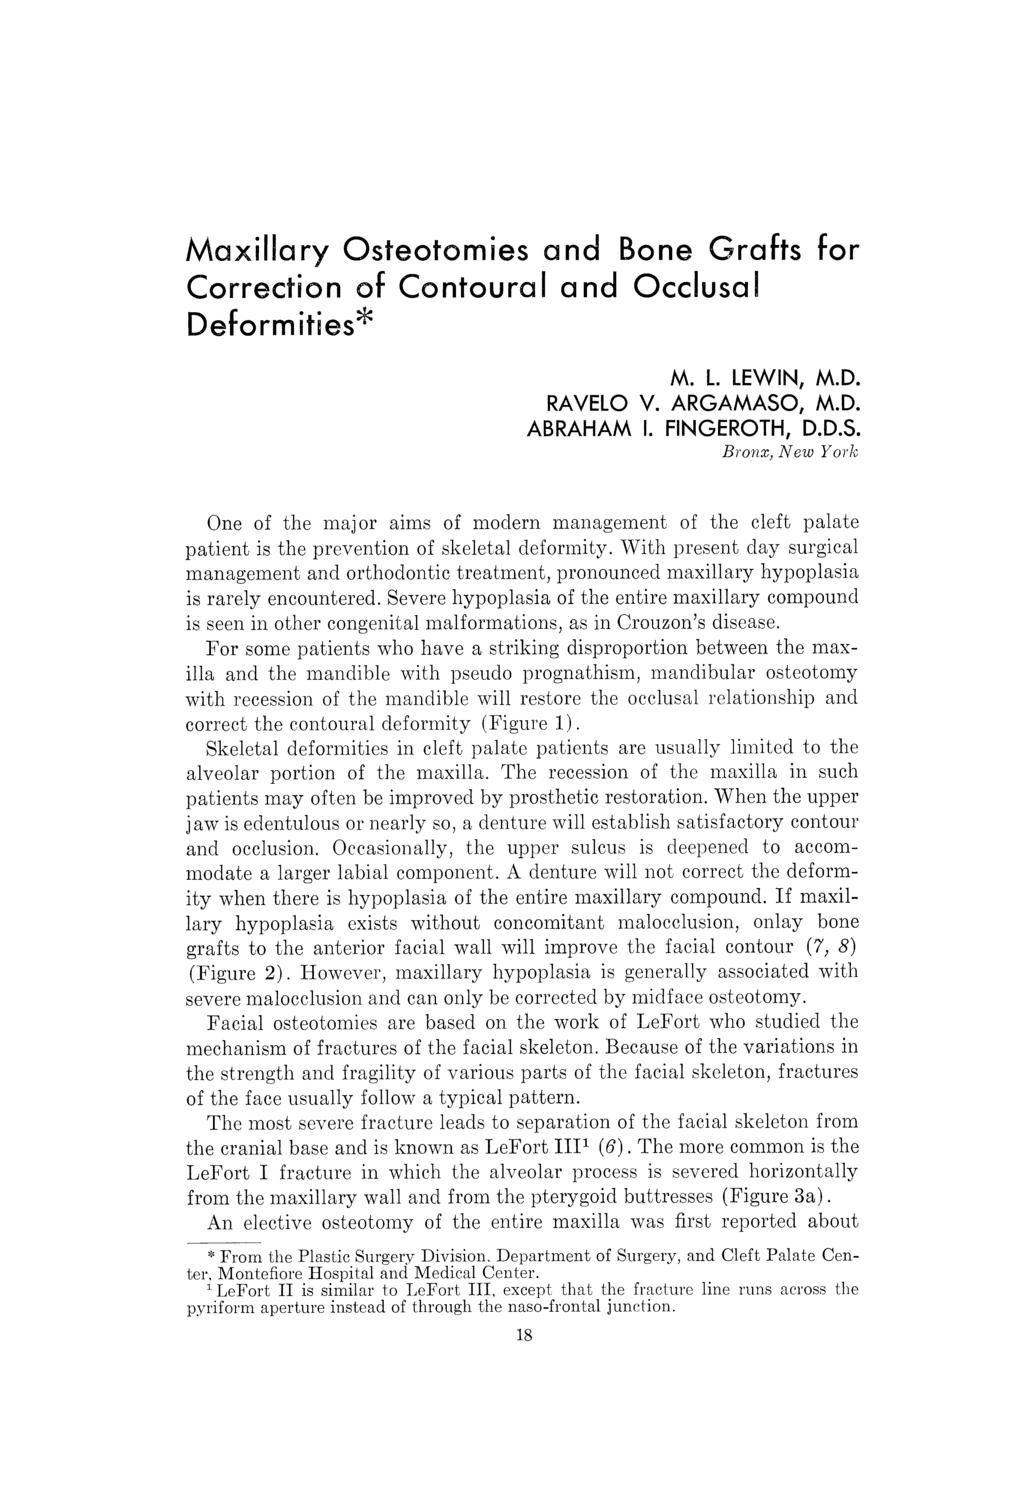 Maxillary Osteotomies and Bone Grafts for Correction of Contoural and Occlusal Deformities* M. L. LEWIN, M.D. RAVELO V. ARGAMASO